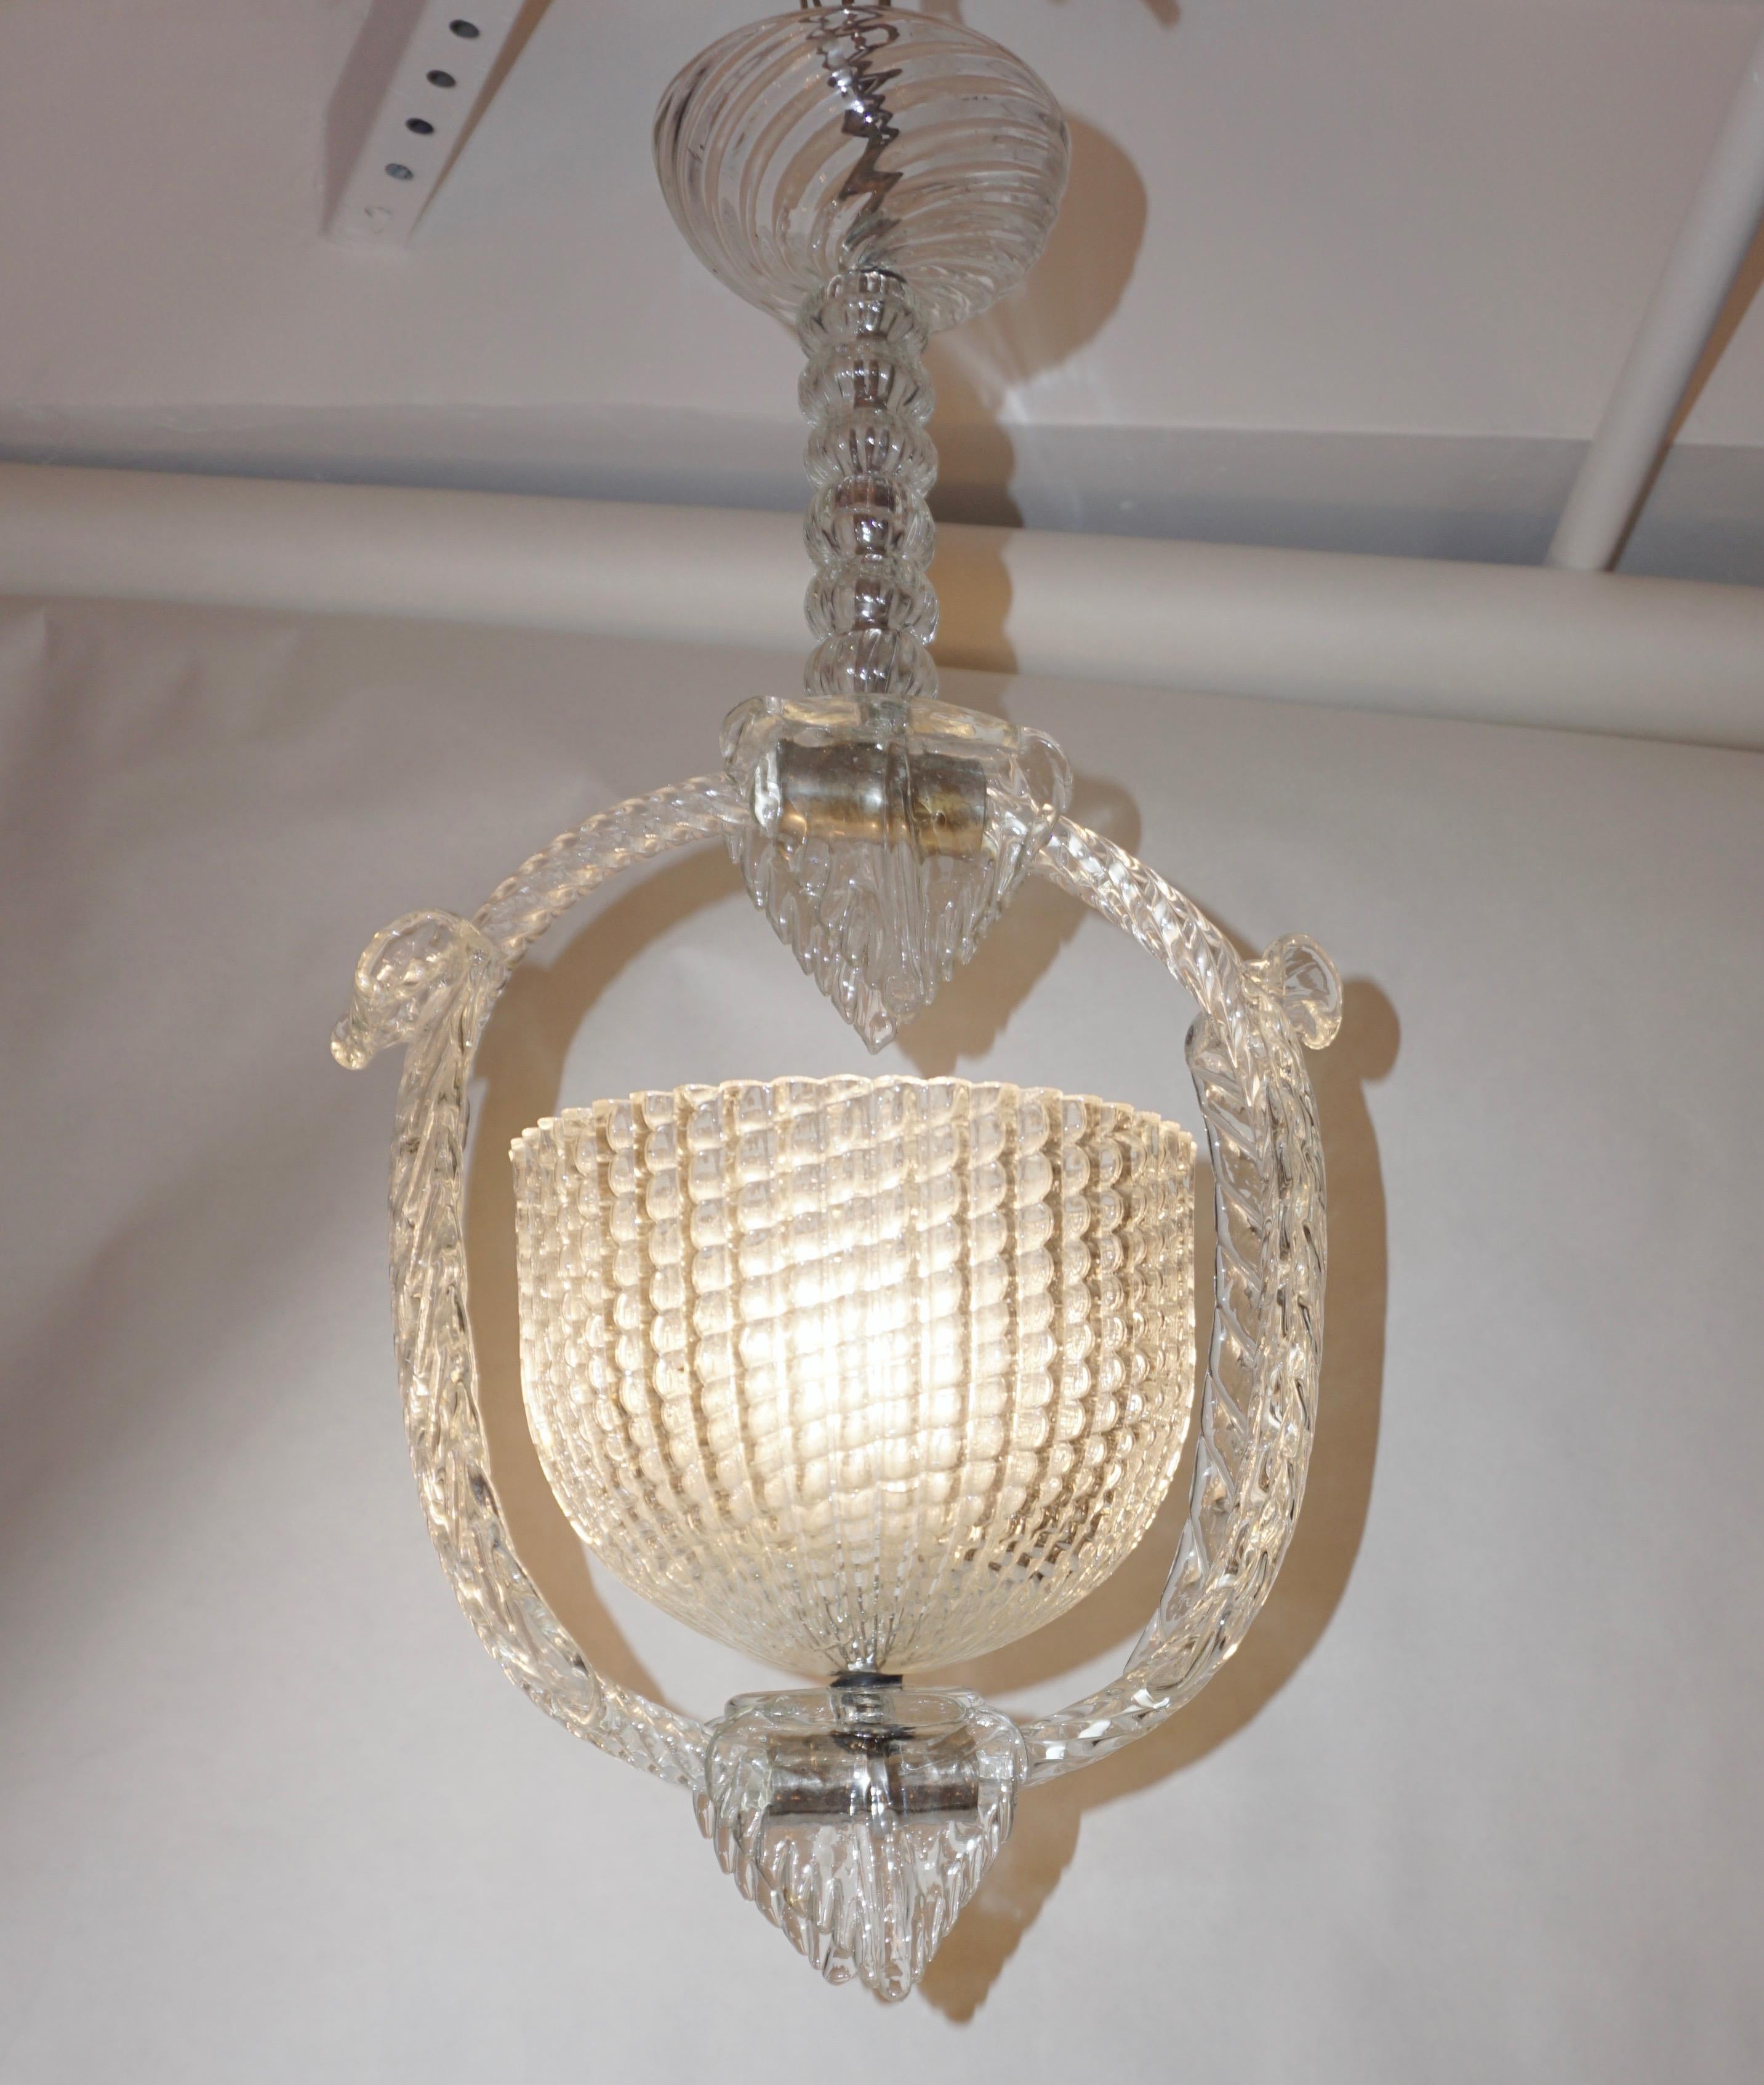 A very elegant antique design by Ercole Barovier, Venetian Art Deco chandelier of exquisite craftsmanship in blown Murano glass, superb original condition. The open bowl containing the light is surrounded by a twisted rope support embellished by two